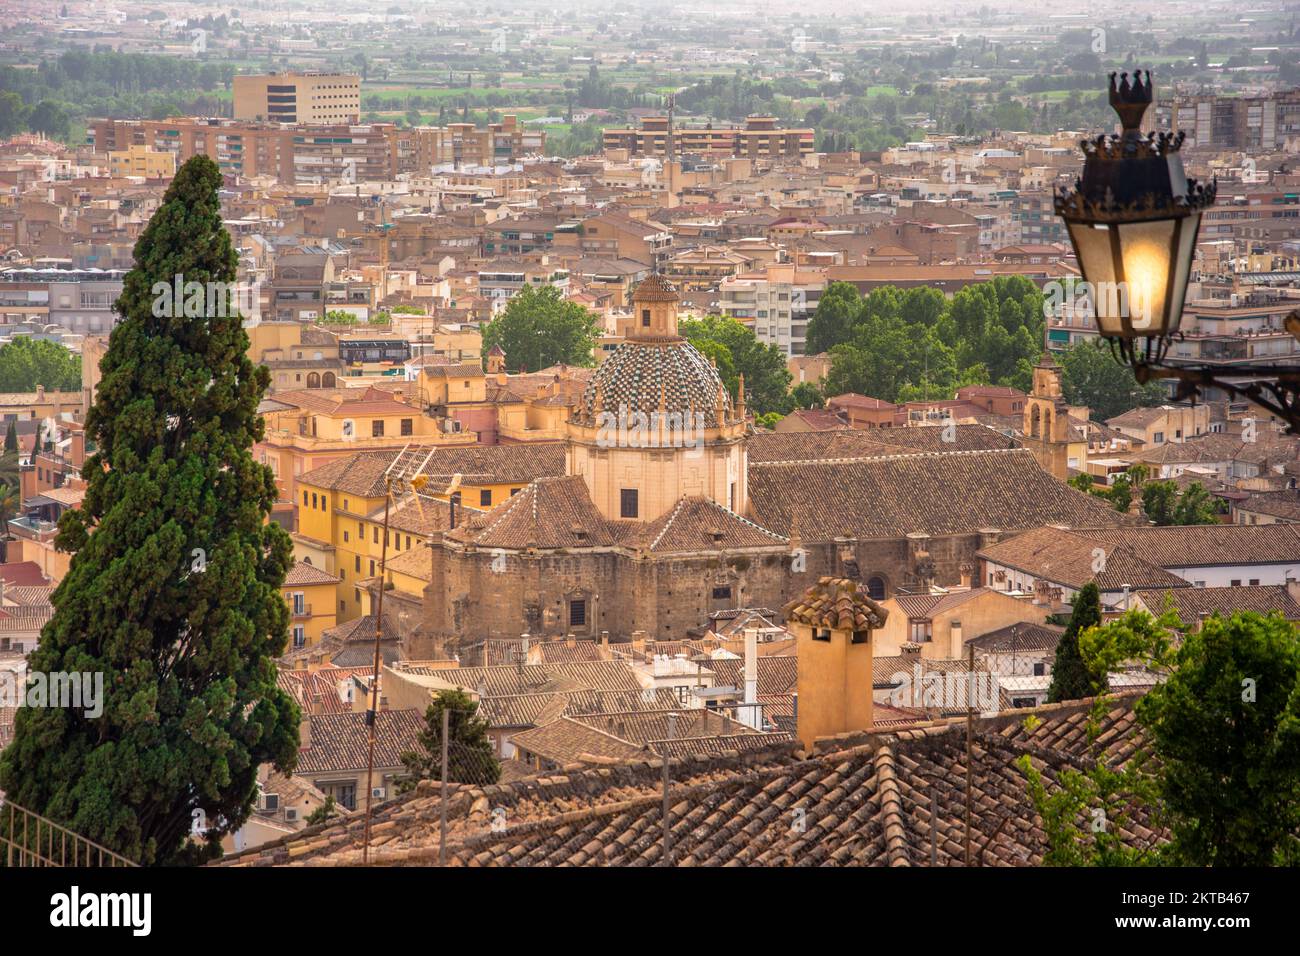 Ancient Alhambra palace in Granada old town, Spain. Stock Photo